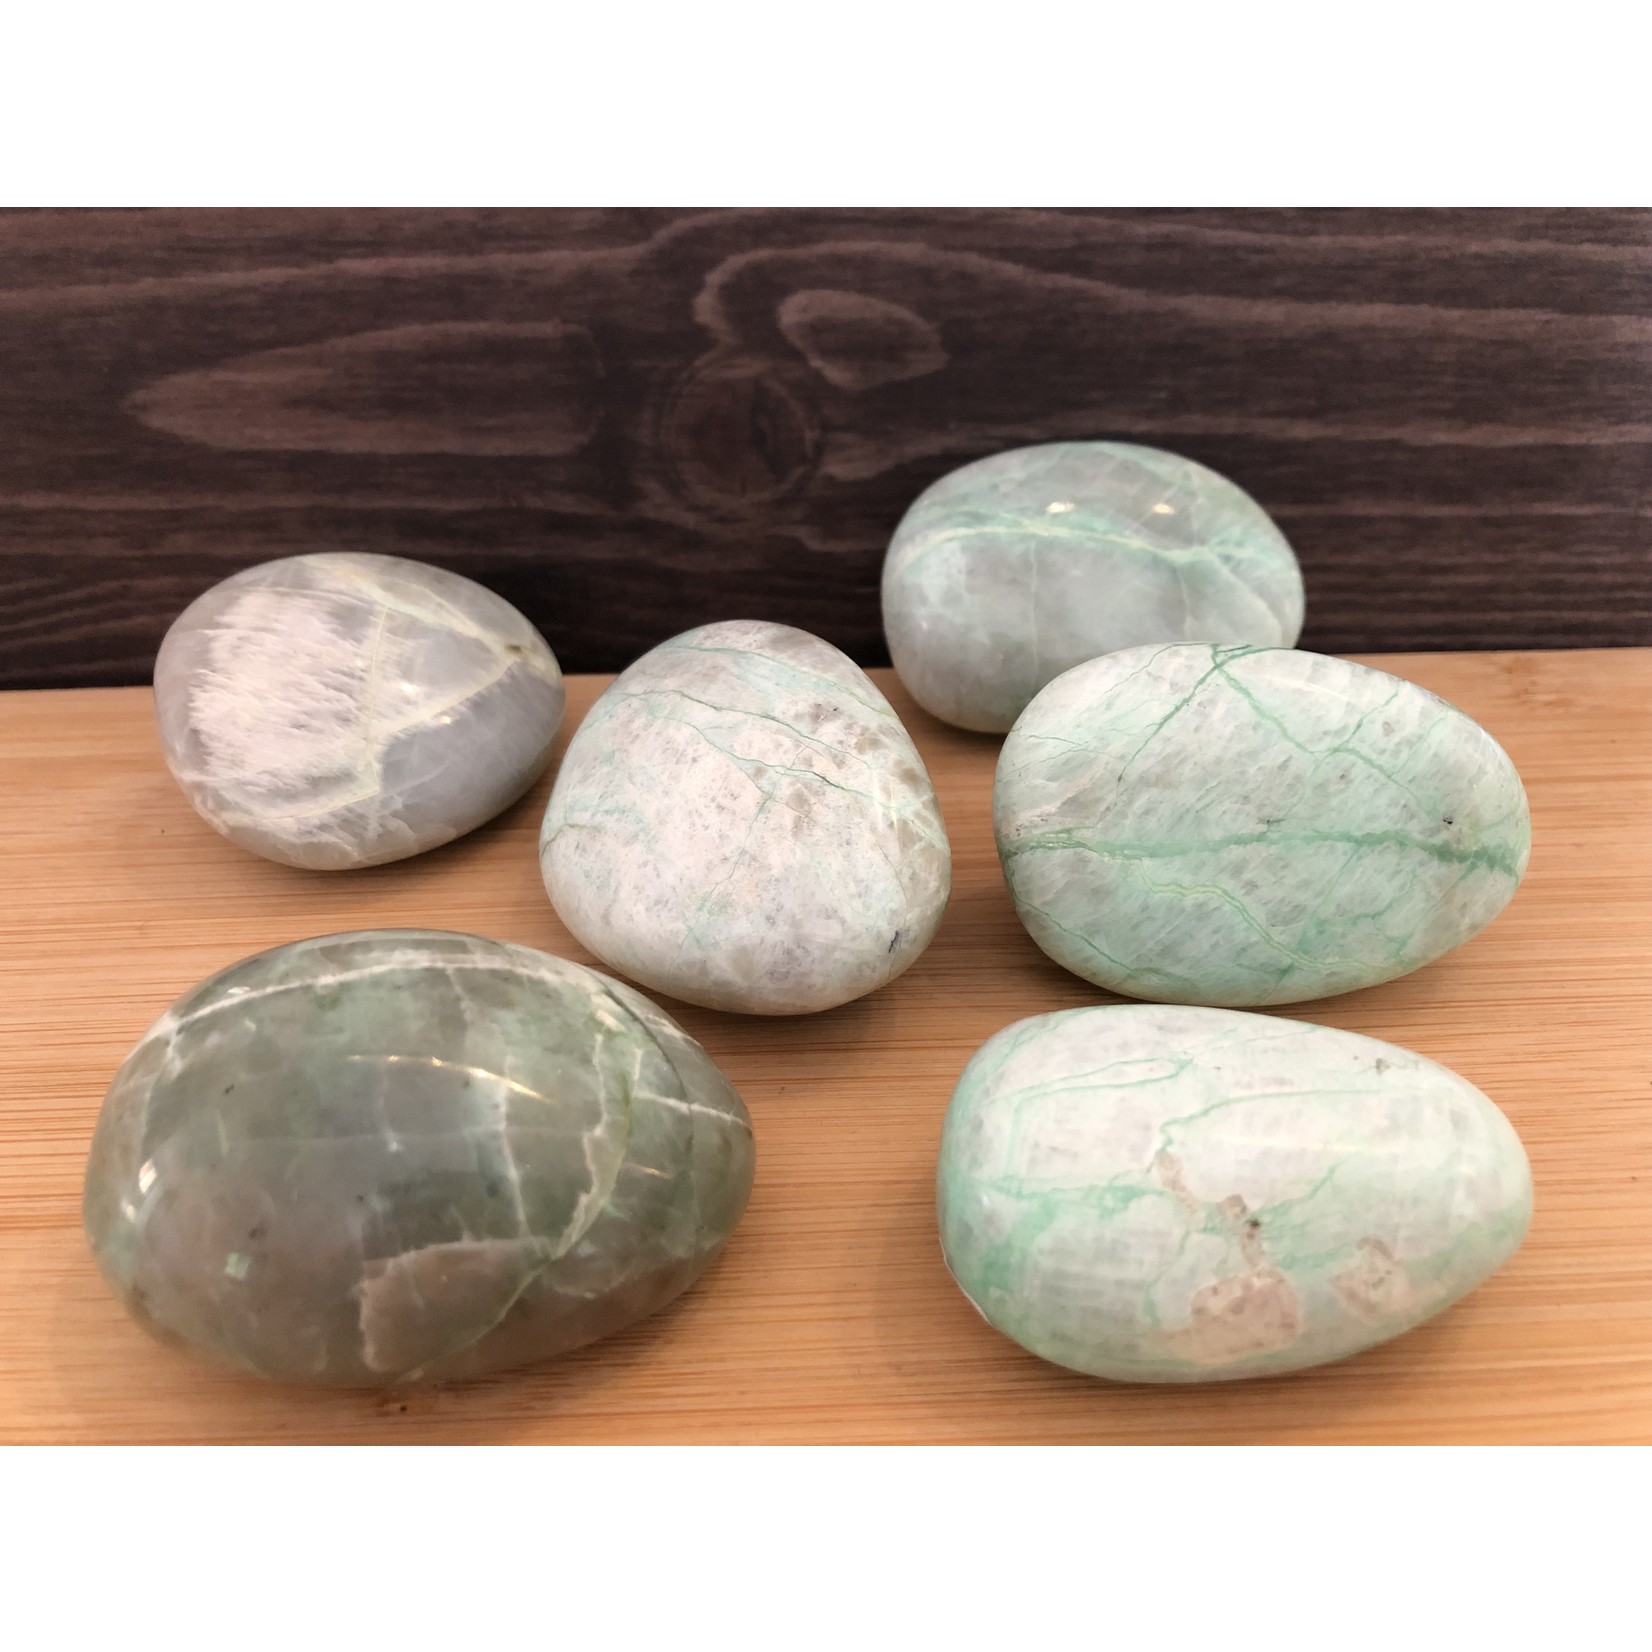 garnierite palm stone, green moonstone worry stone, polished garnierite stone, increases our vibratory frequency